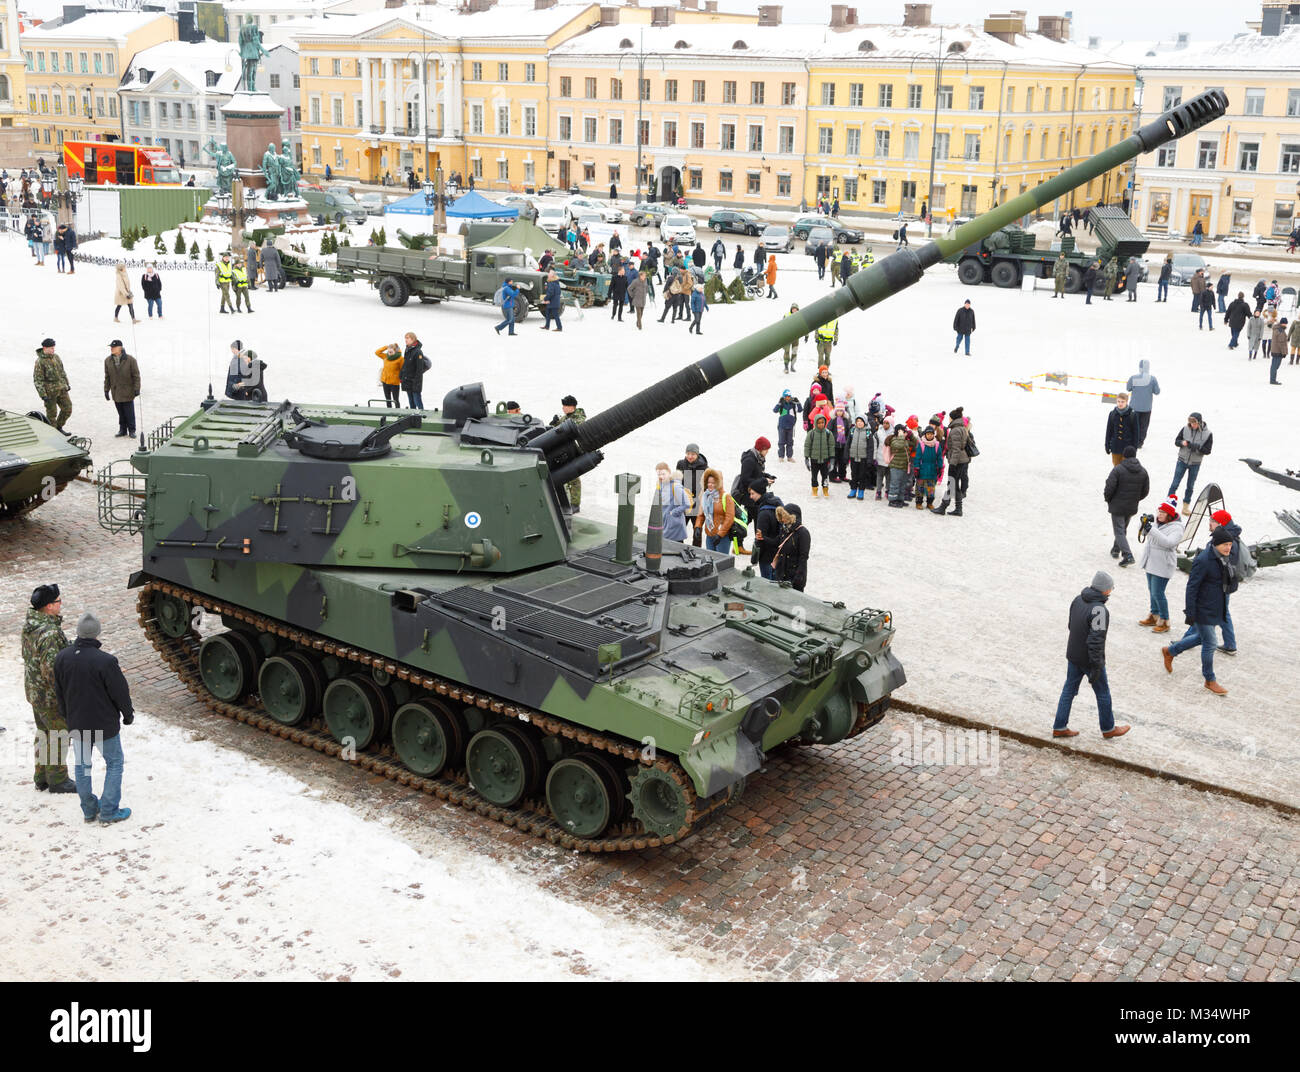 Helsinki, Finland. 8th Feb, 2018. To commemorate the 100 years history of artillery in independent Finland, a public event was arranged at the Senate Square of Helsinki on 9 February 2018. There was a display of present-day equipment, including the K9 Thunder self-propelled howitzer, made in the Republic of Korea. Credit: Hannu Mononen/Alamy Live News Stock Photo